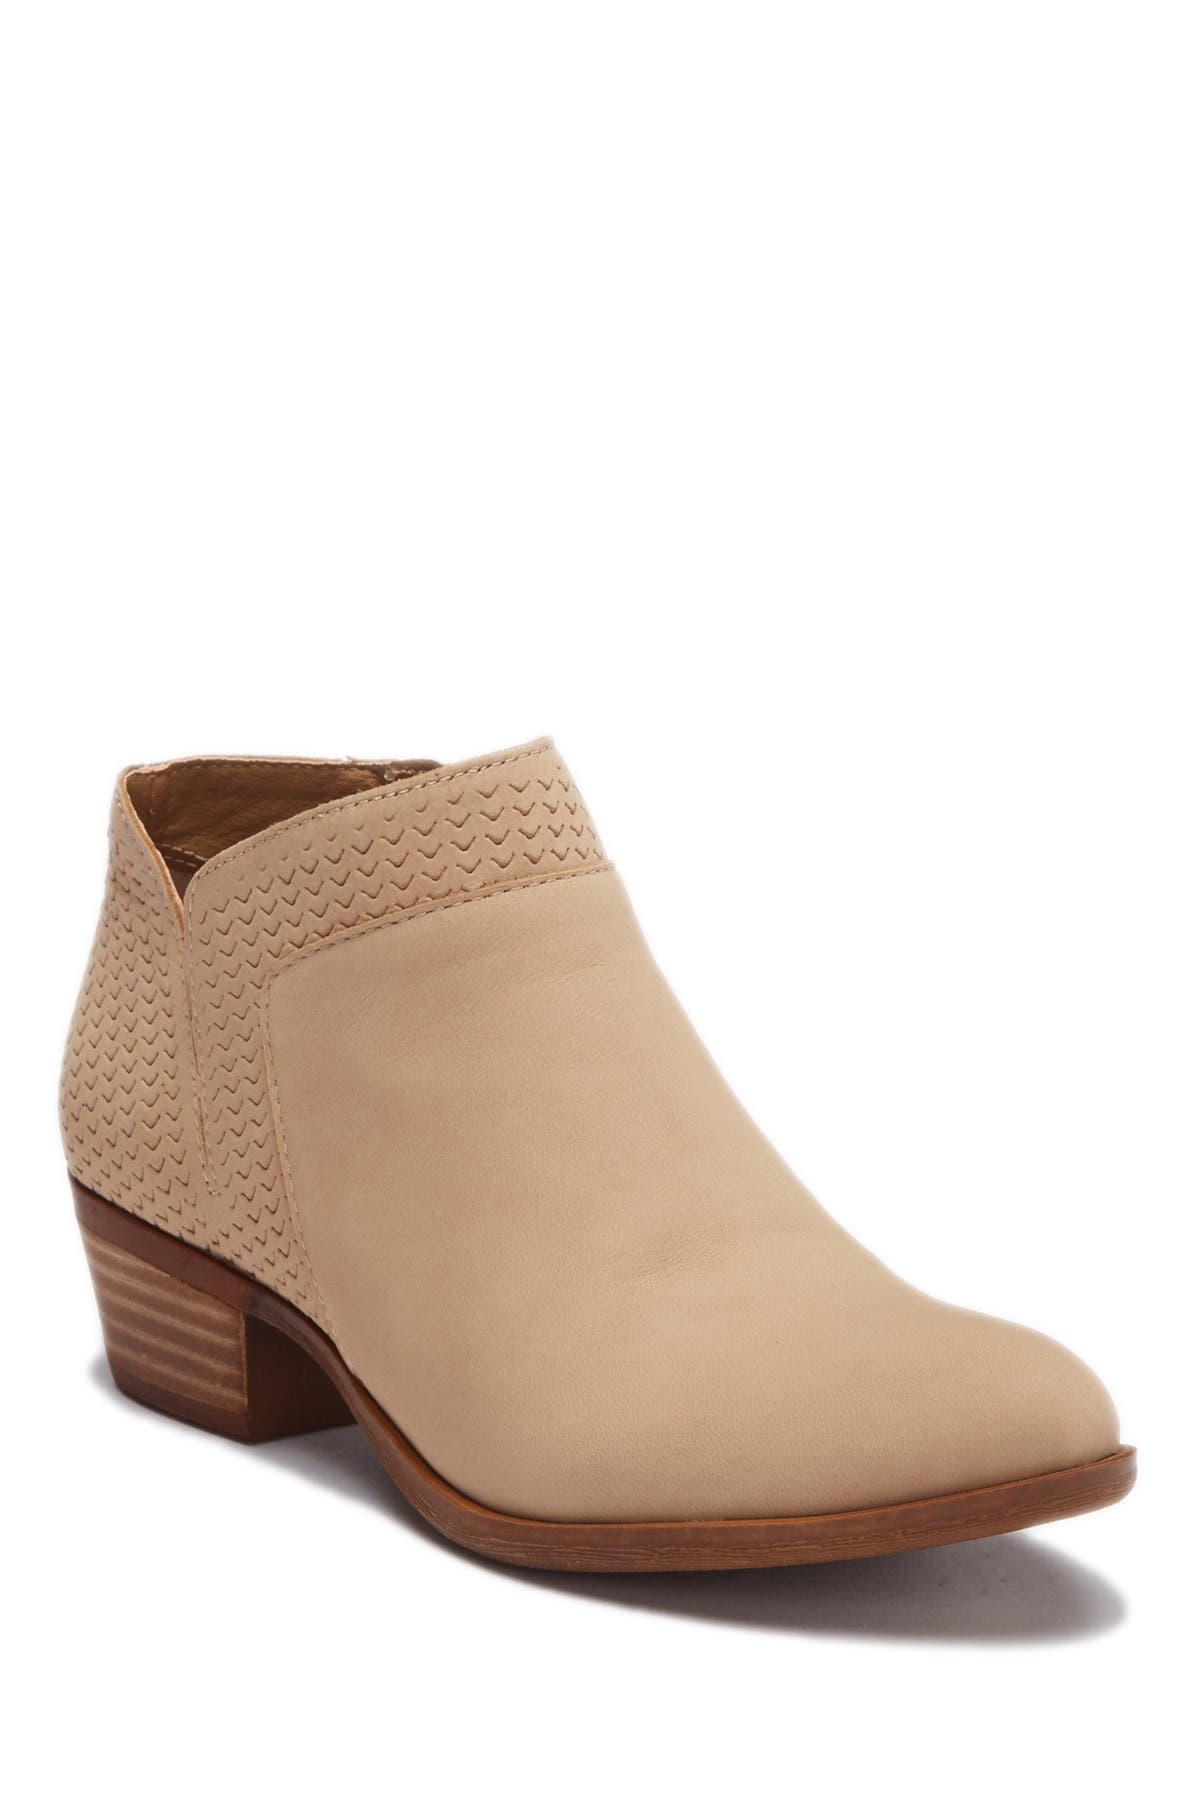 Lucky Brand | Brintly Perforated Ankle 